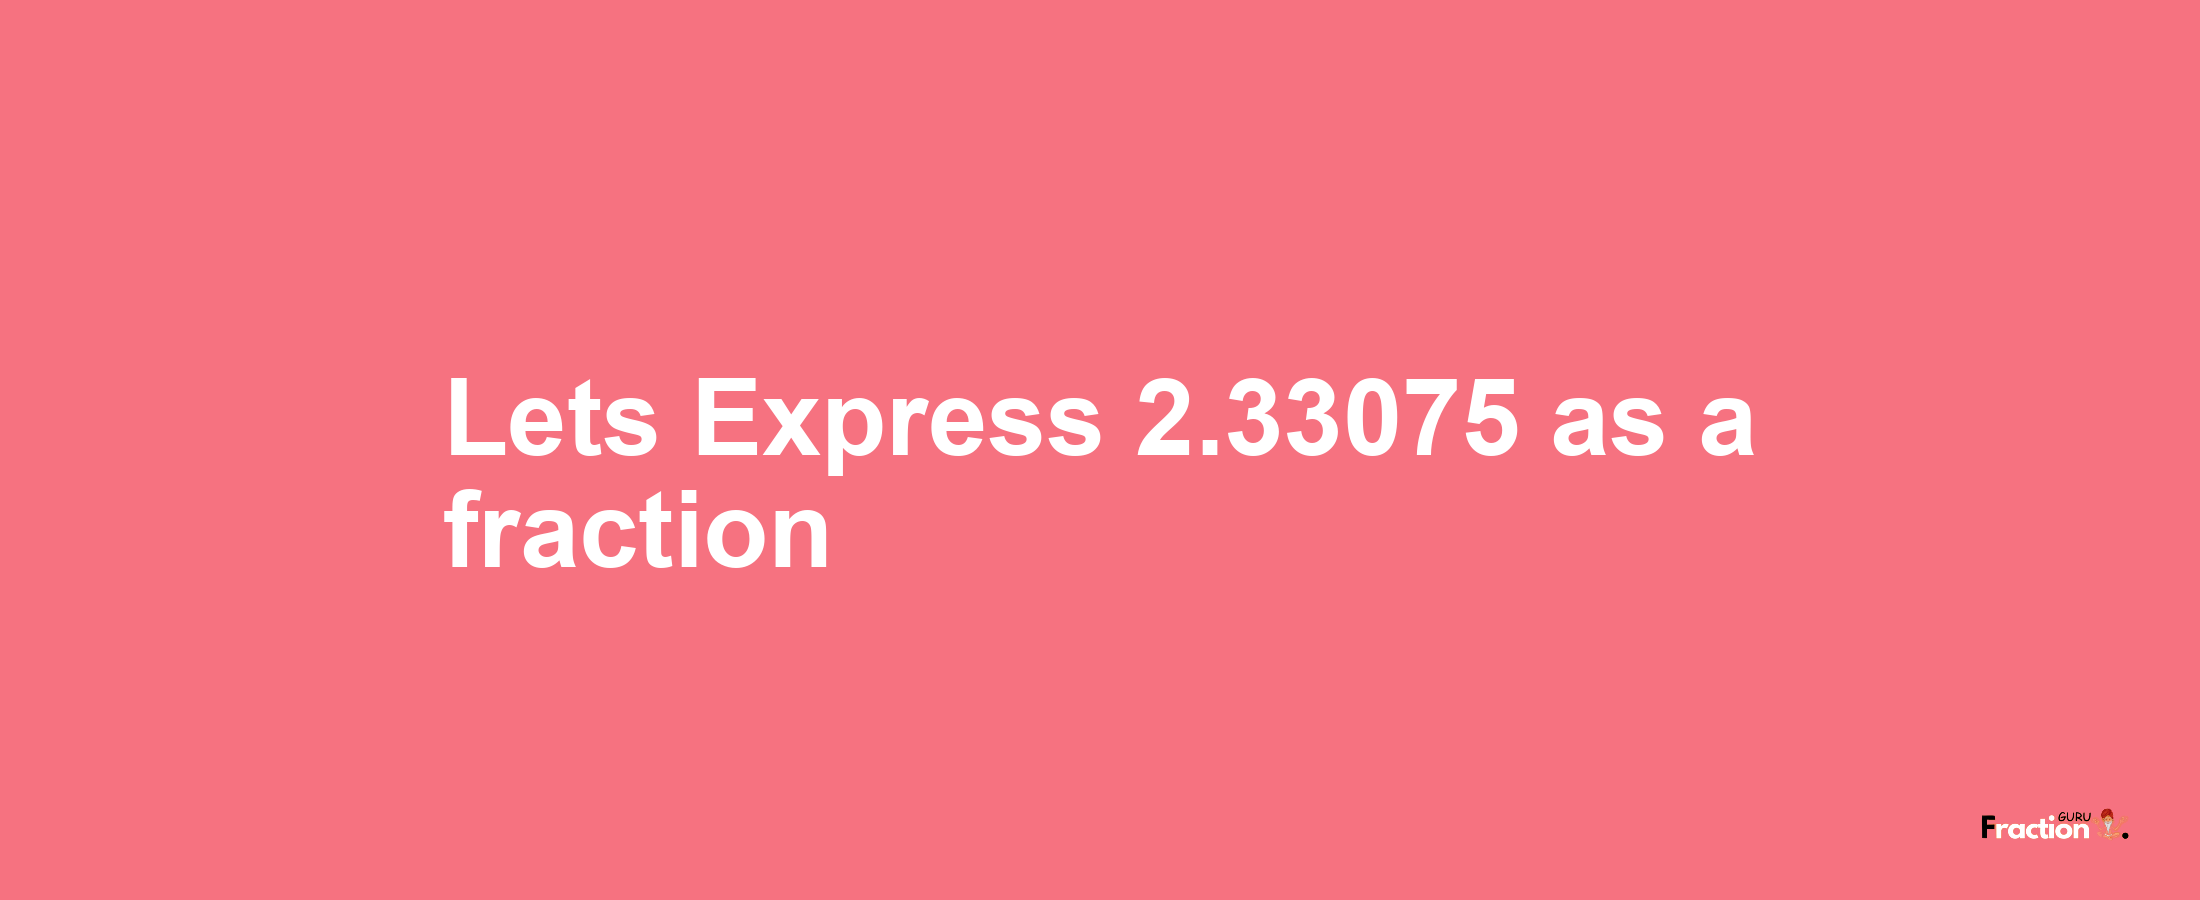 Lets Express 2.33075 as afraction